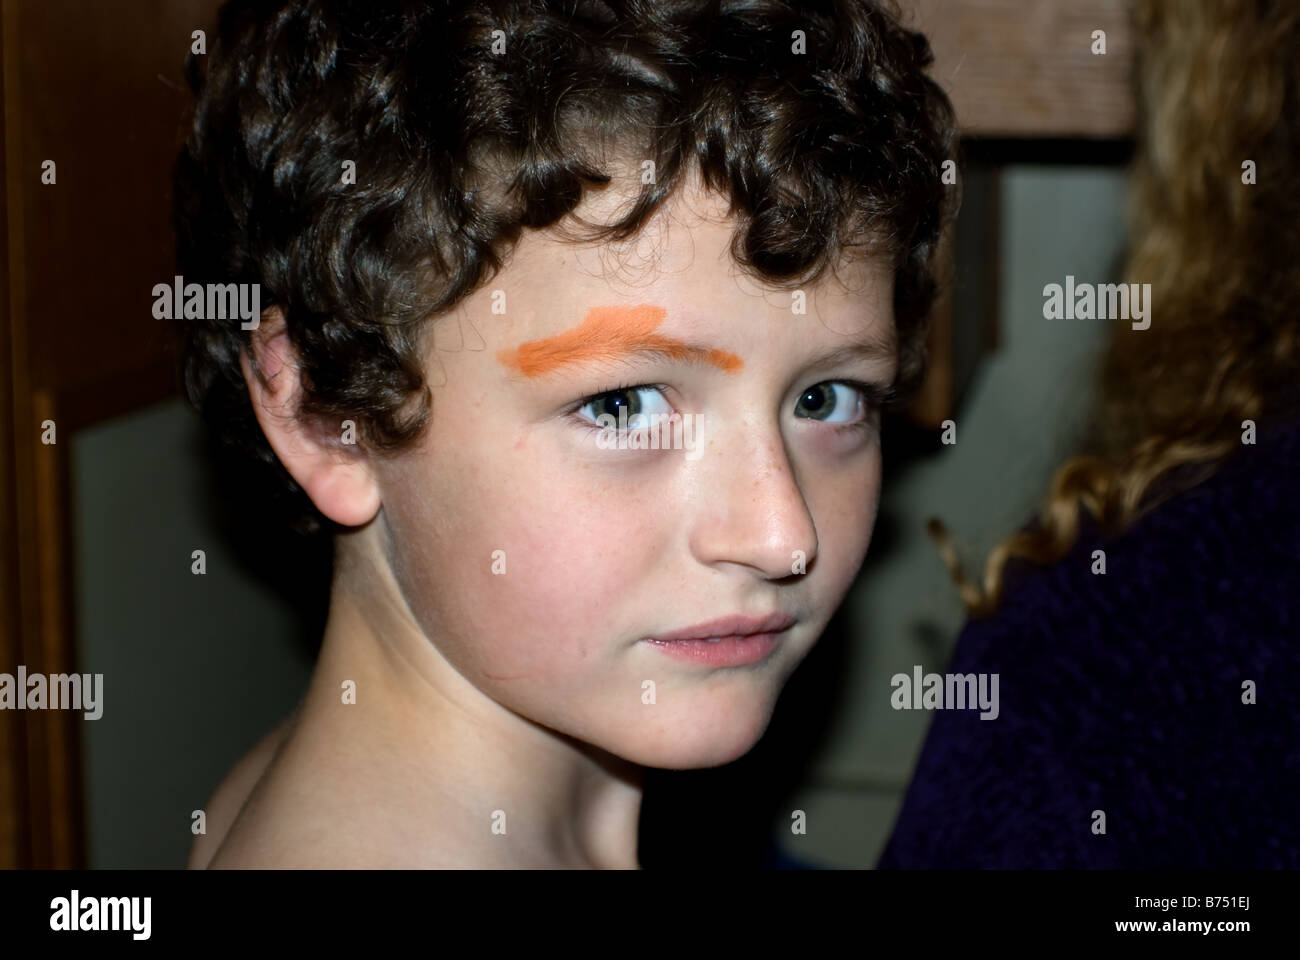 Young boy caught painting his face Stock Photo